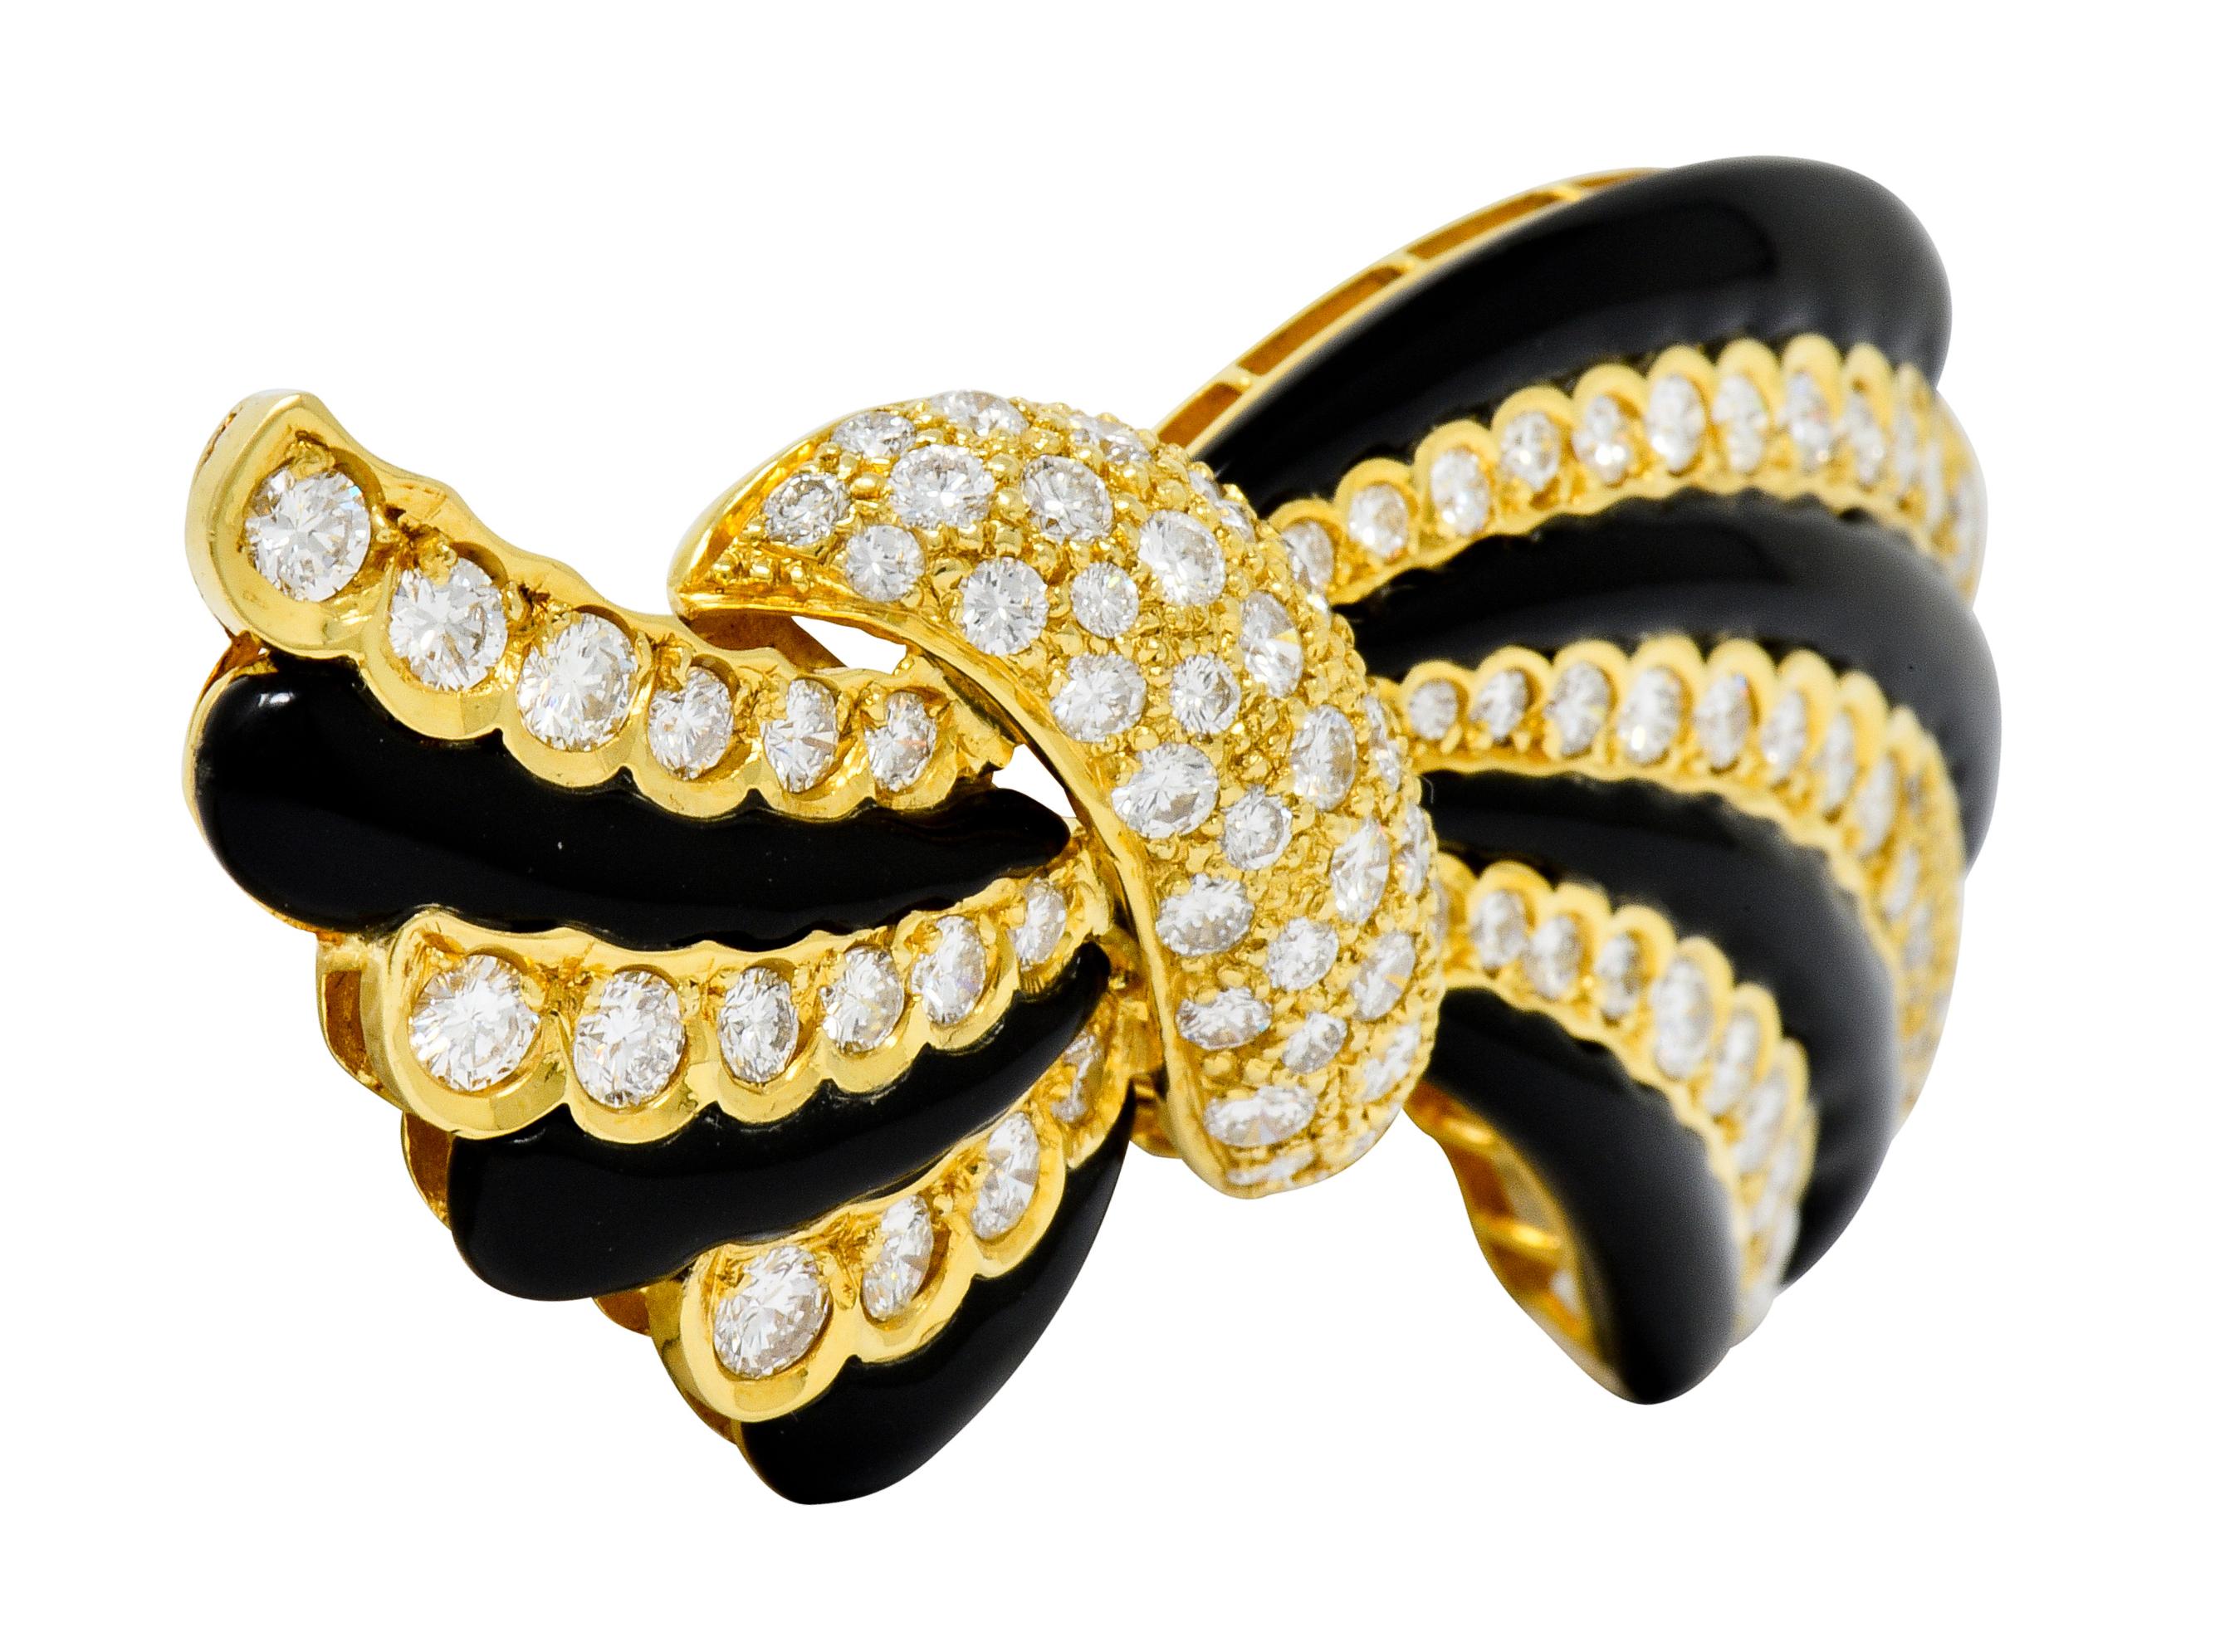 Brooch is designed as a stylized bow motif, contraposto, with black onyx stripes alternating with rows of diamonds and a pavè diamond center

Rows of diamonds feature an elegantly scalloped gold edge flush set against the calibrè cut onyx, excellent